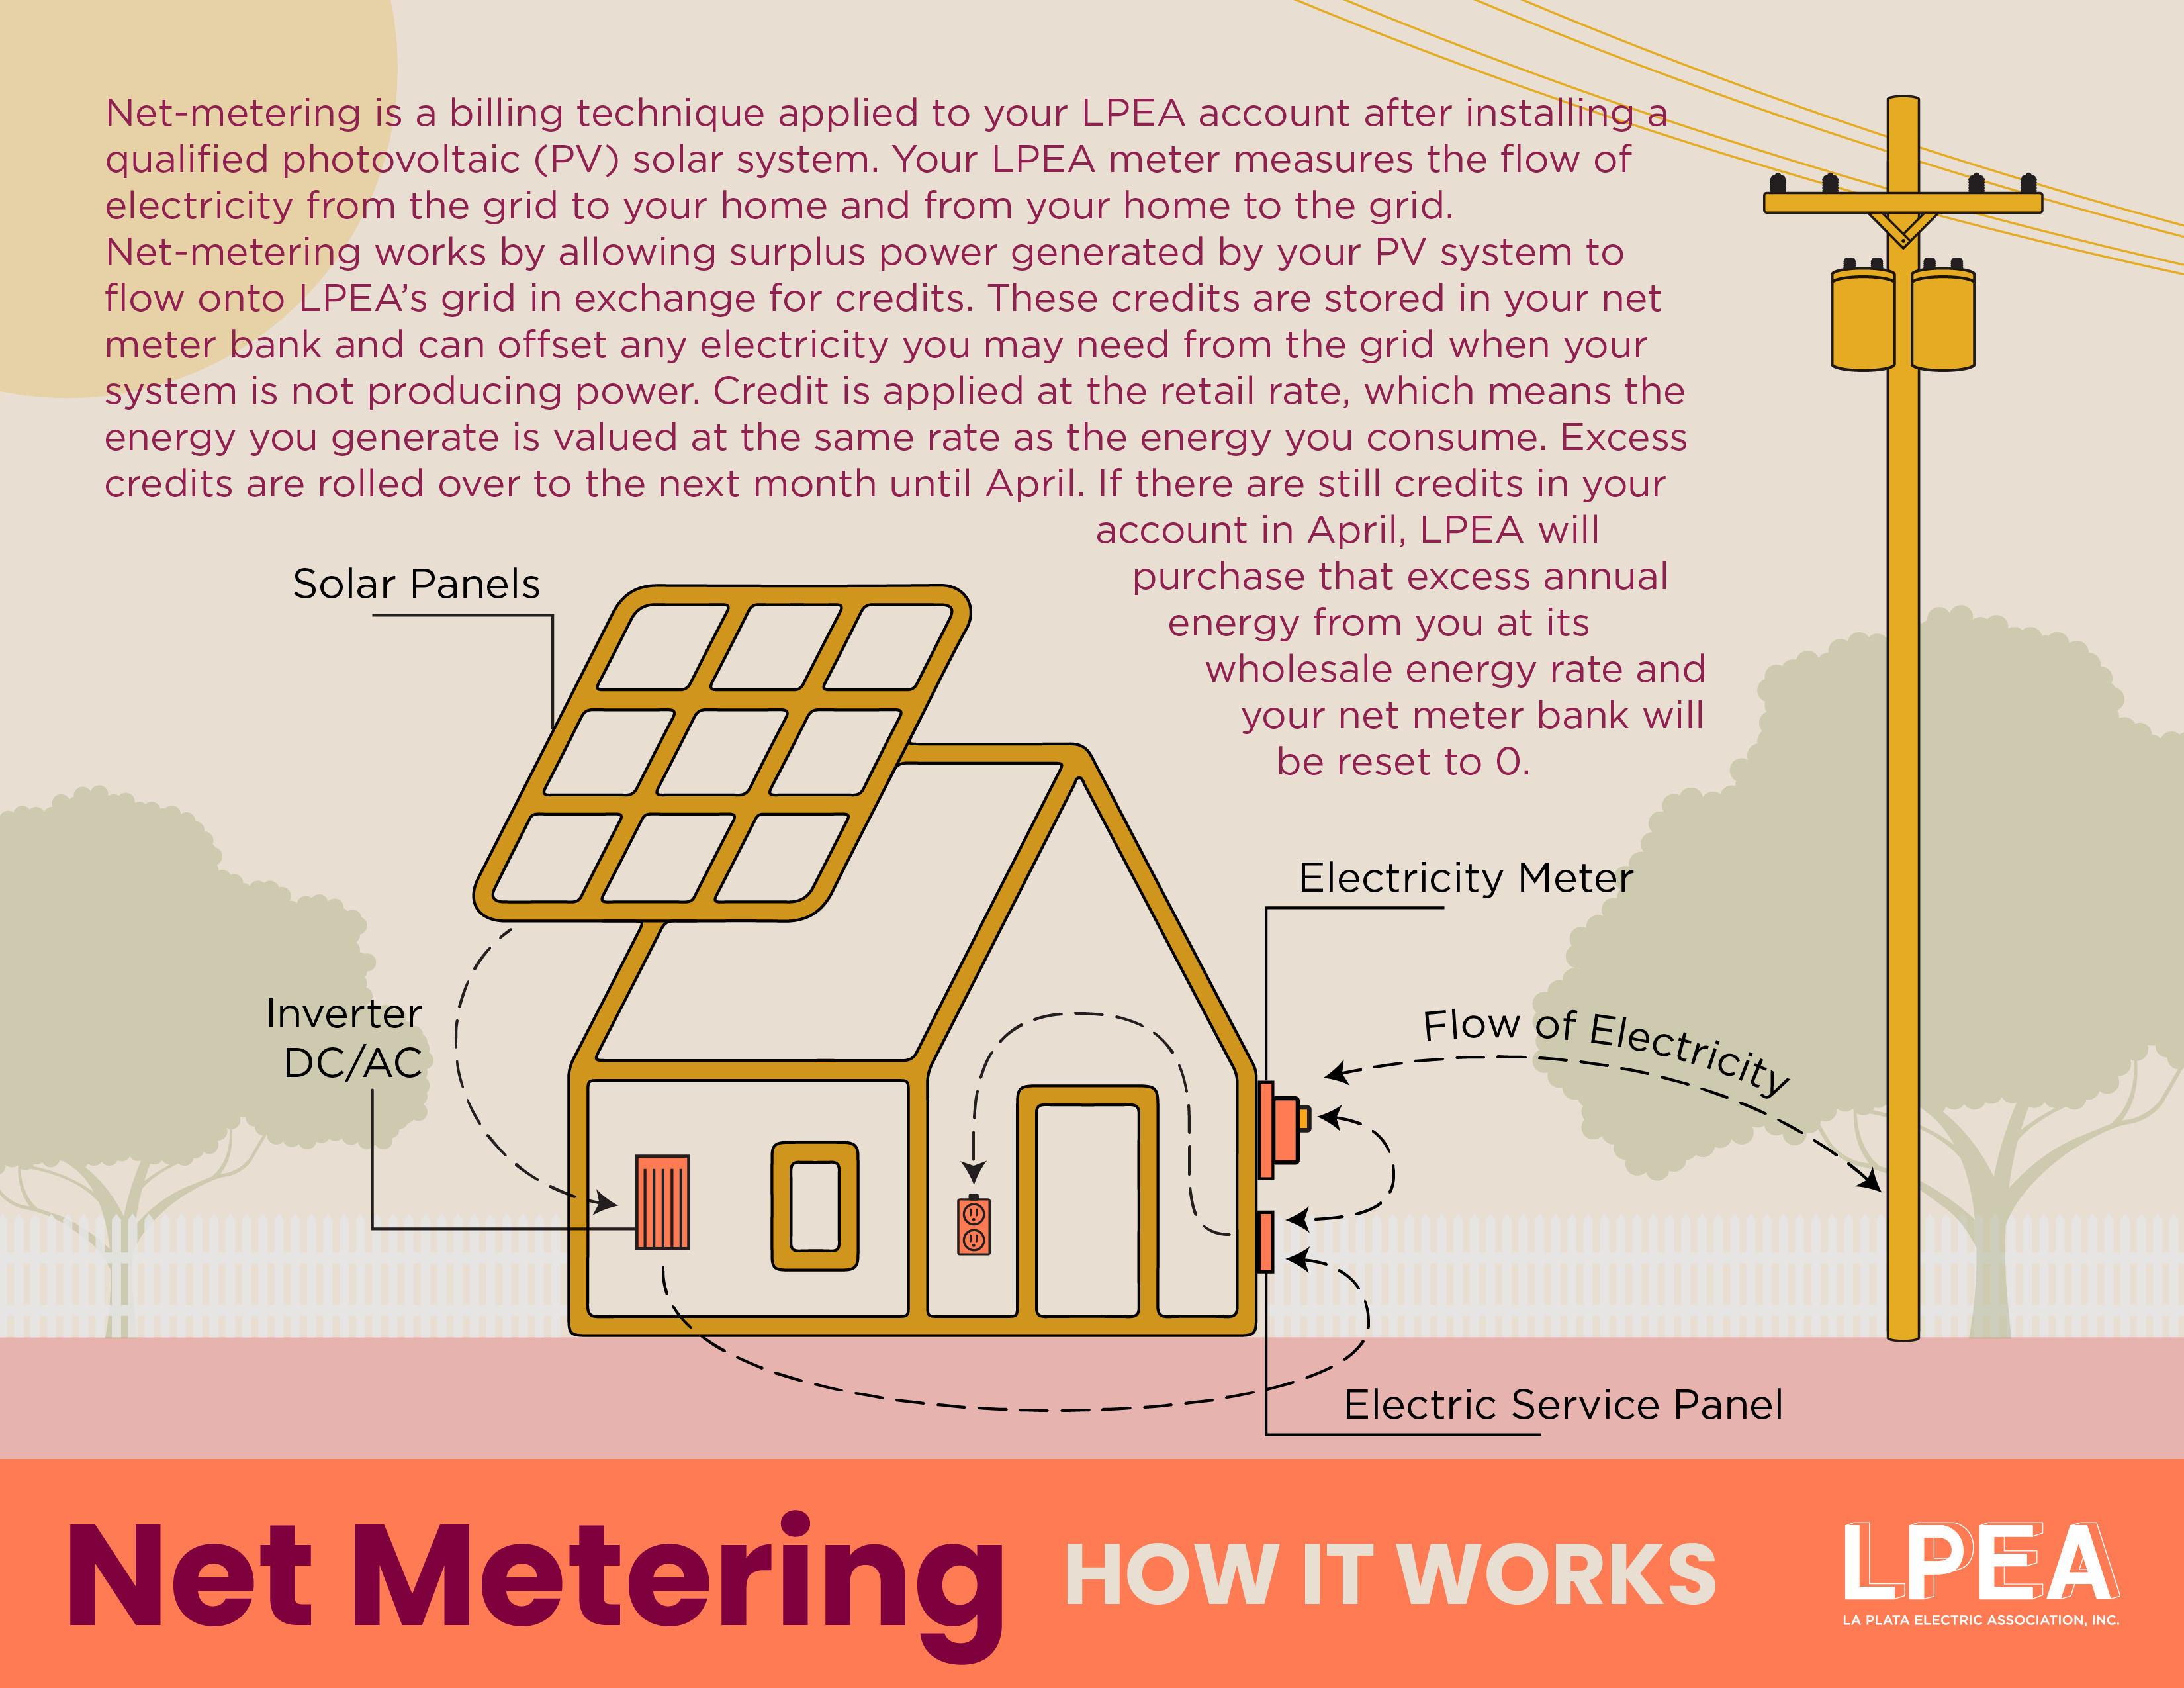 A graphic showing the paths of electricity through solar panels and net metering